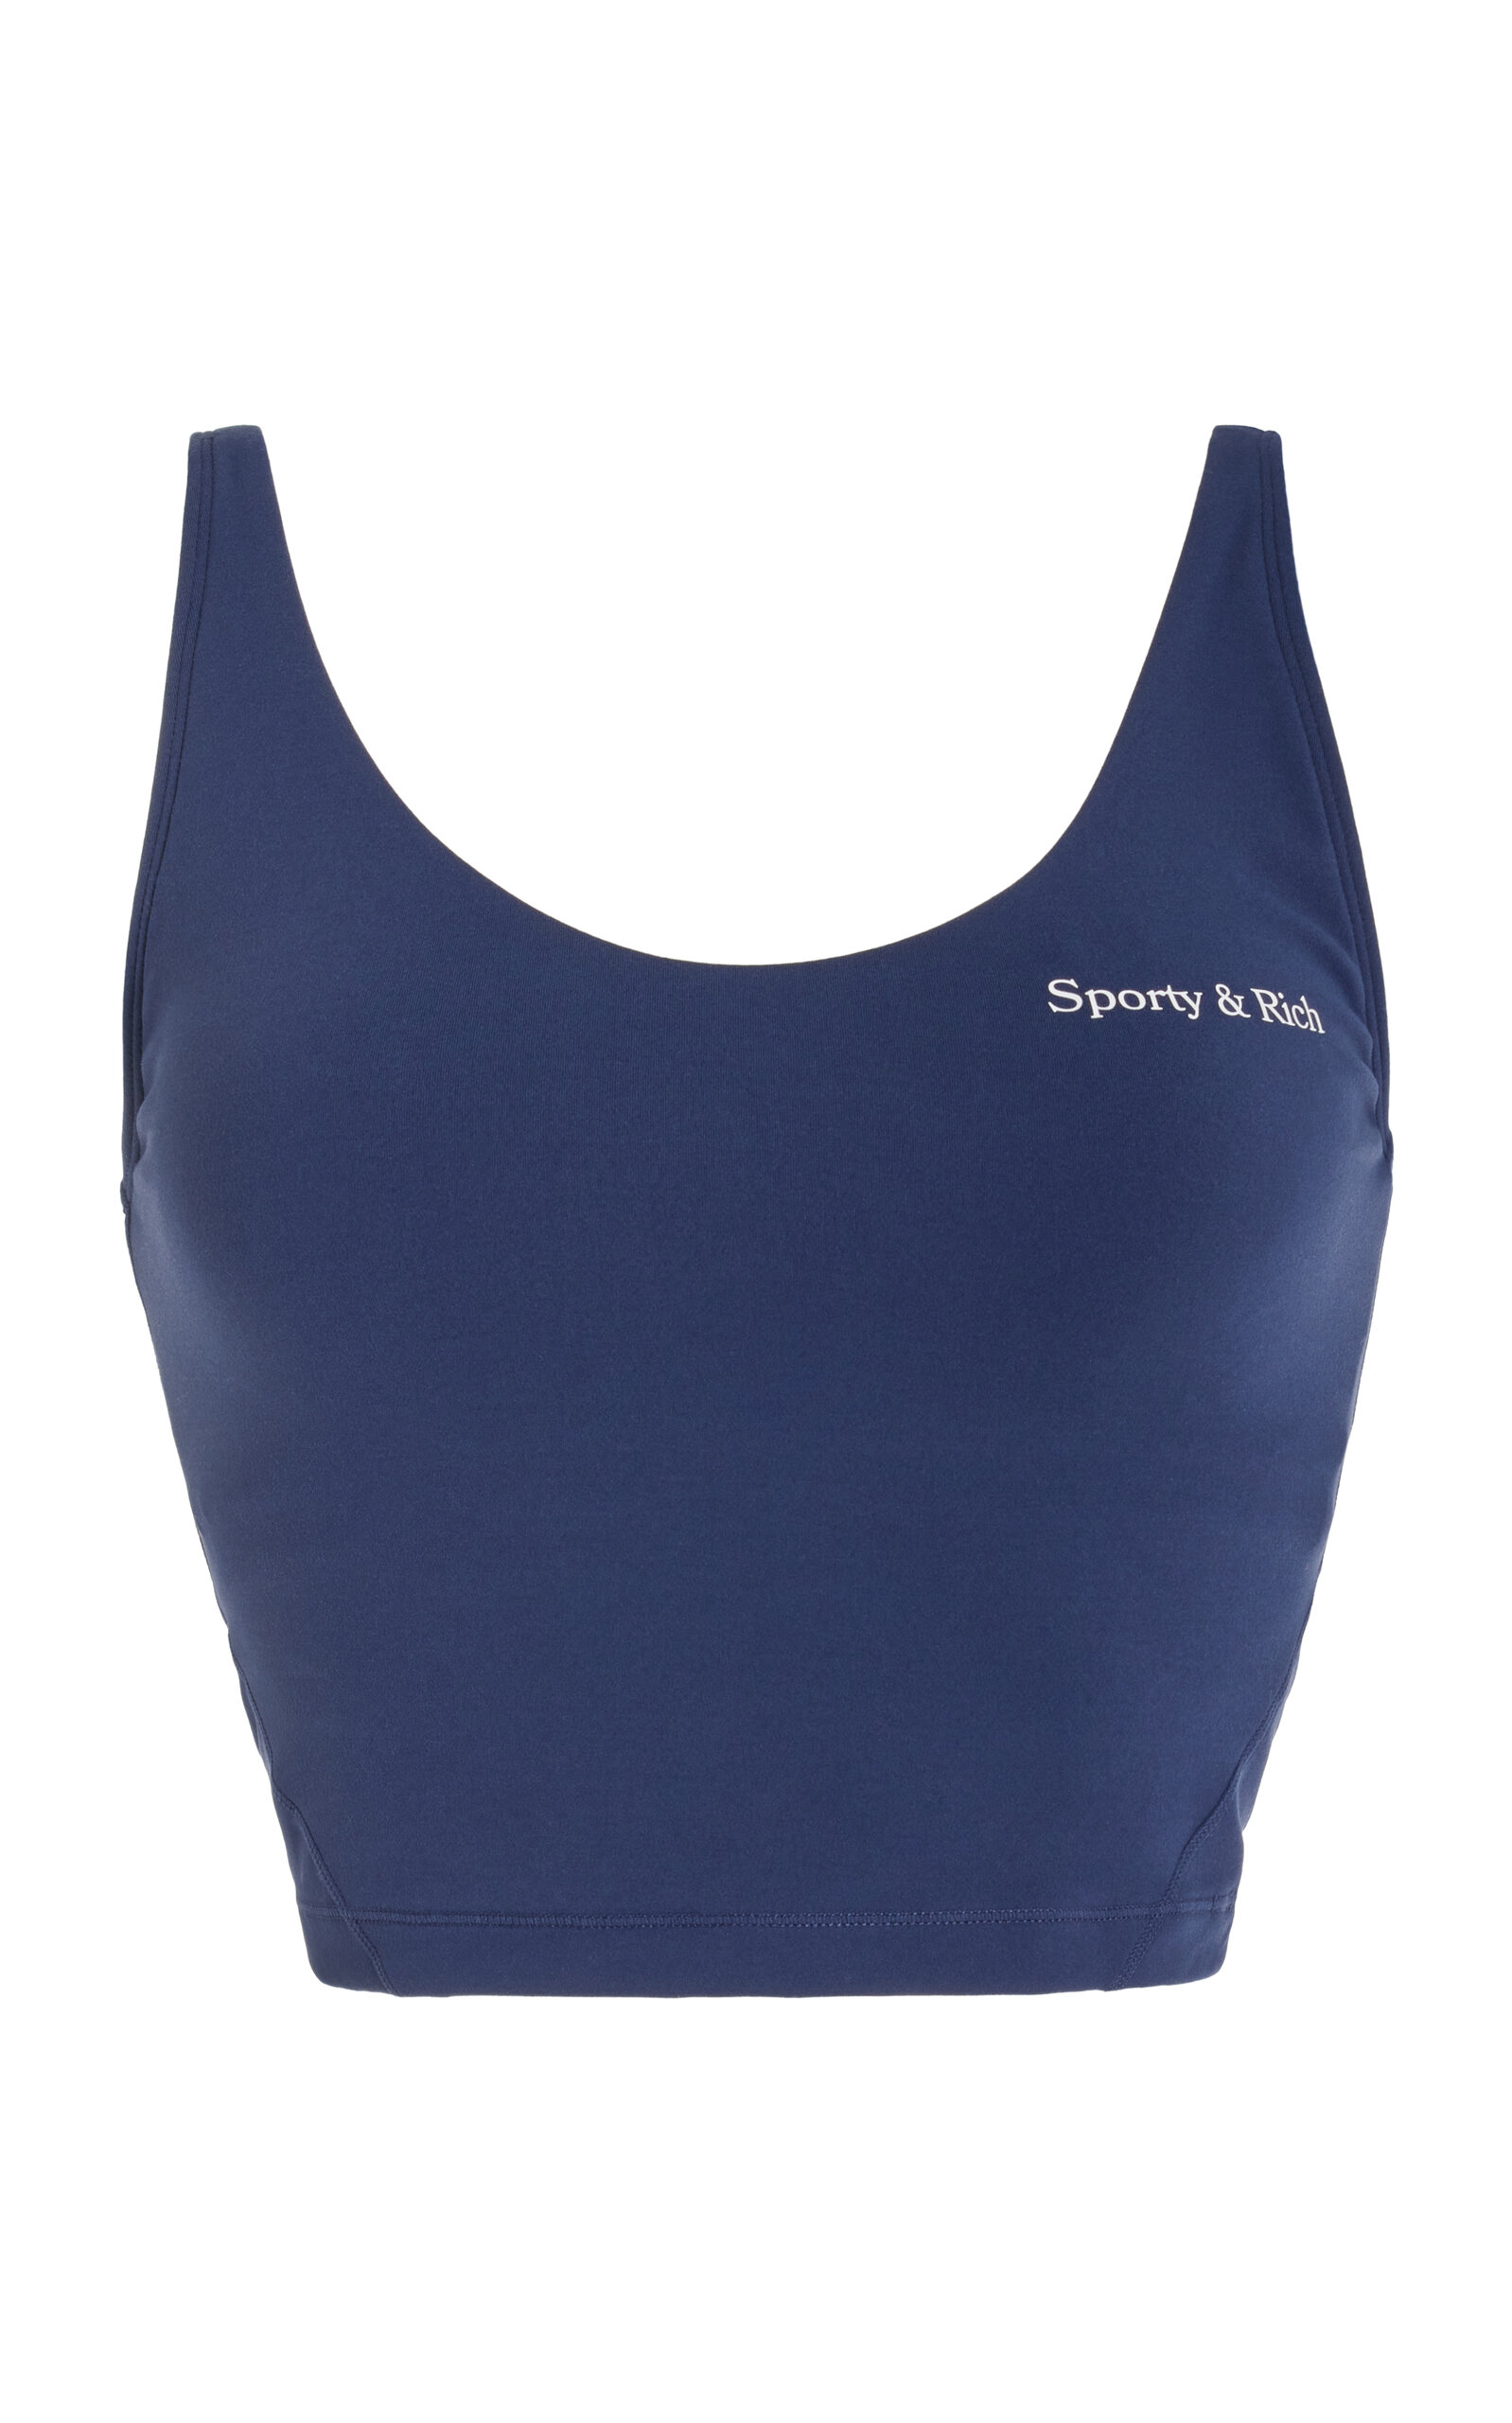 SPORTY AND RICH WOMEN'S CROPPED JERSEY TANK TOP